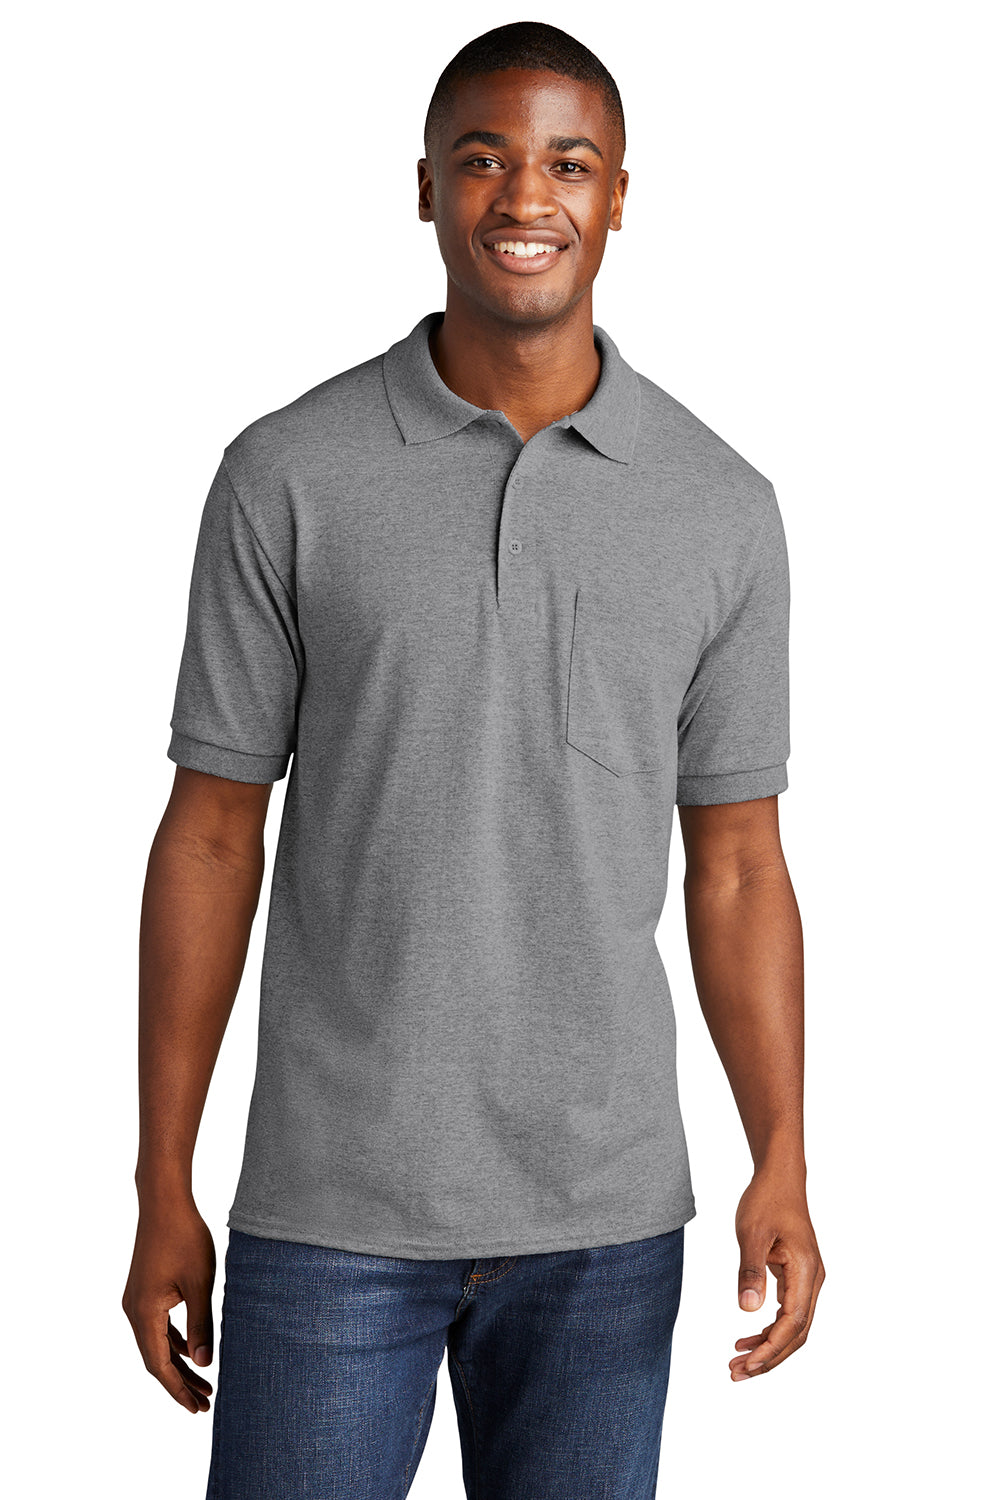 Port & Company KP55P Mens Core Stain Resistant Short Sleeve Polo Shirt w/ Pocket Heather Grey Front